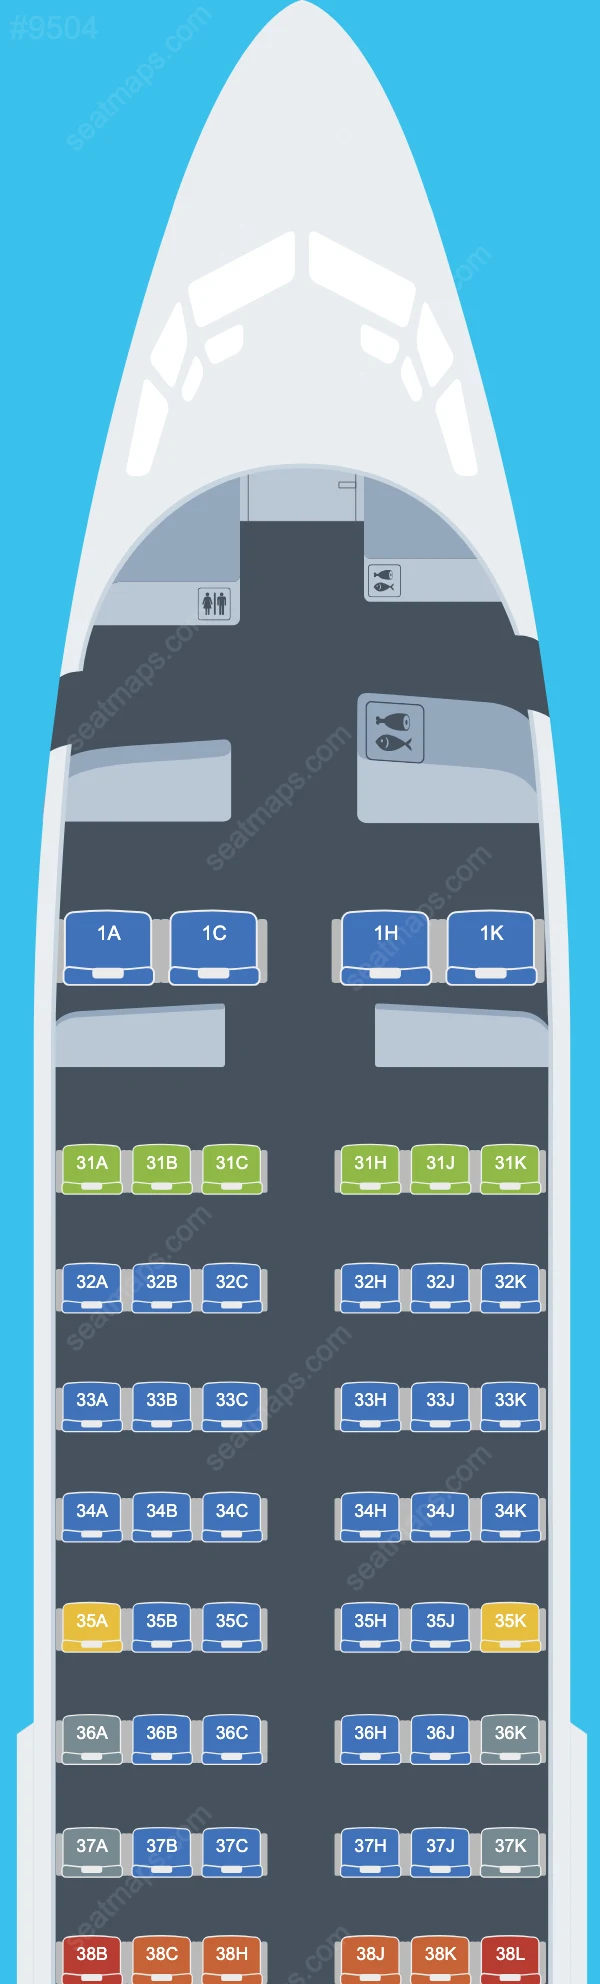 China Southern Boeing 737 Seat Maps 737-700 V.6